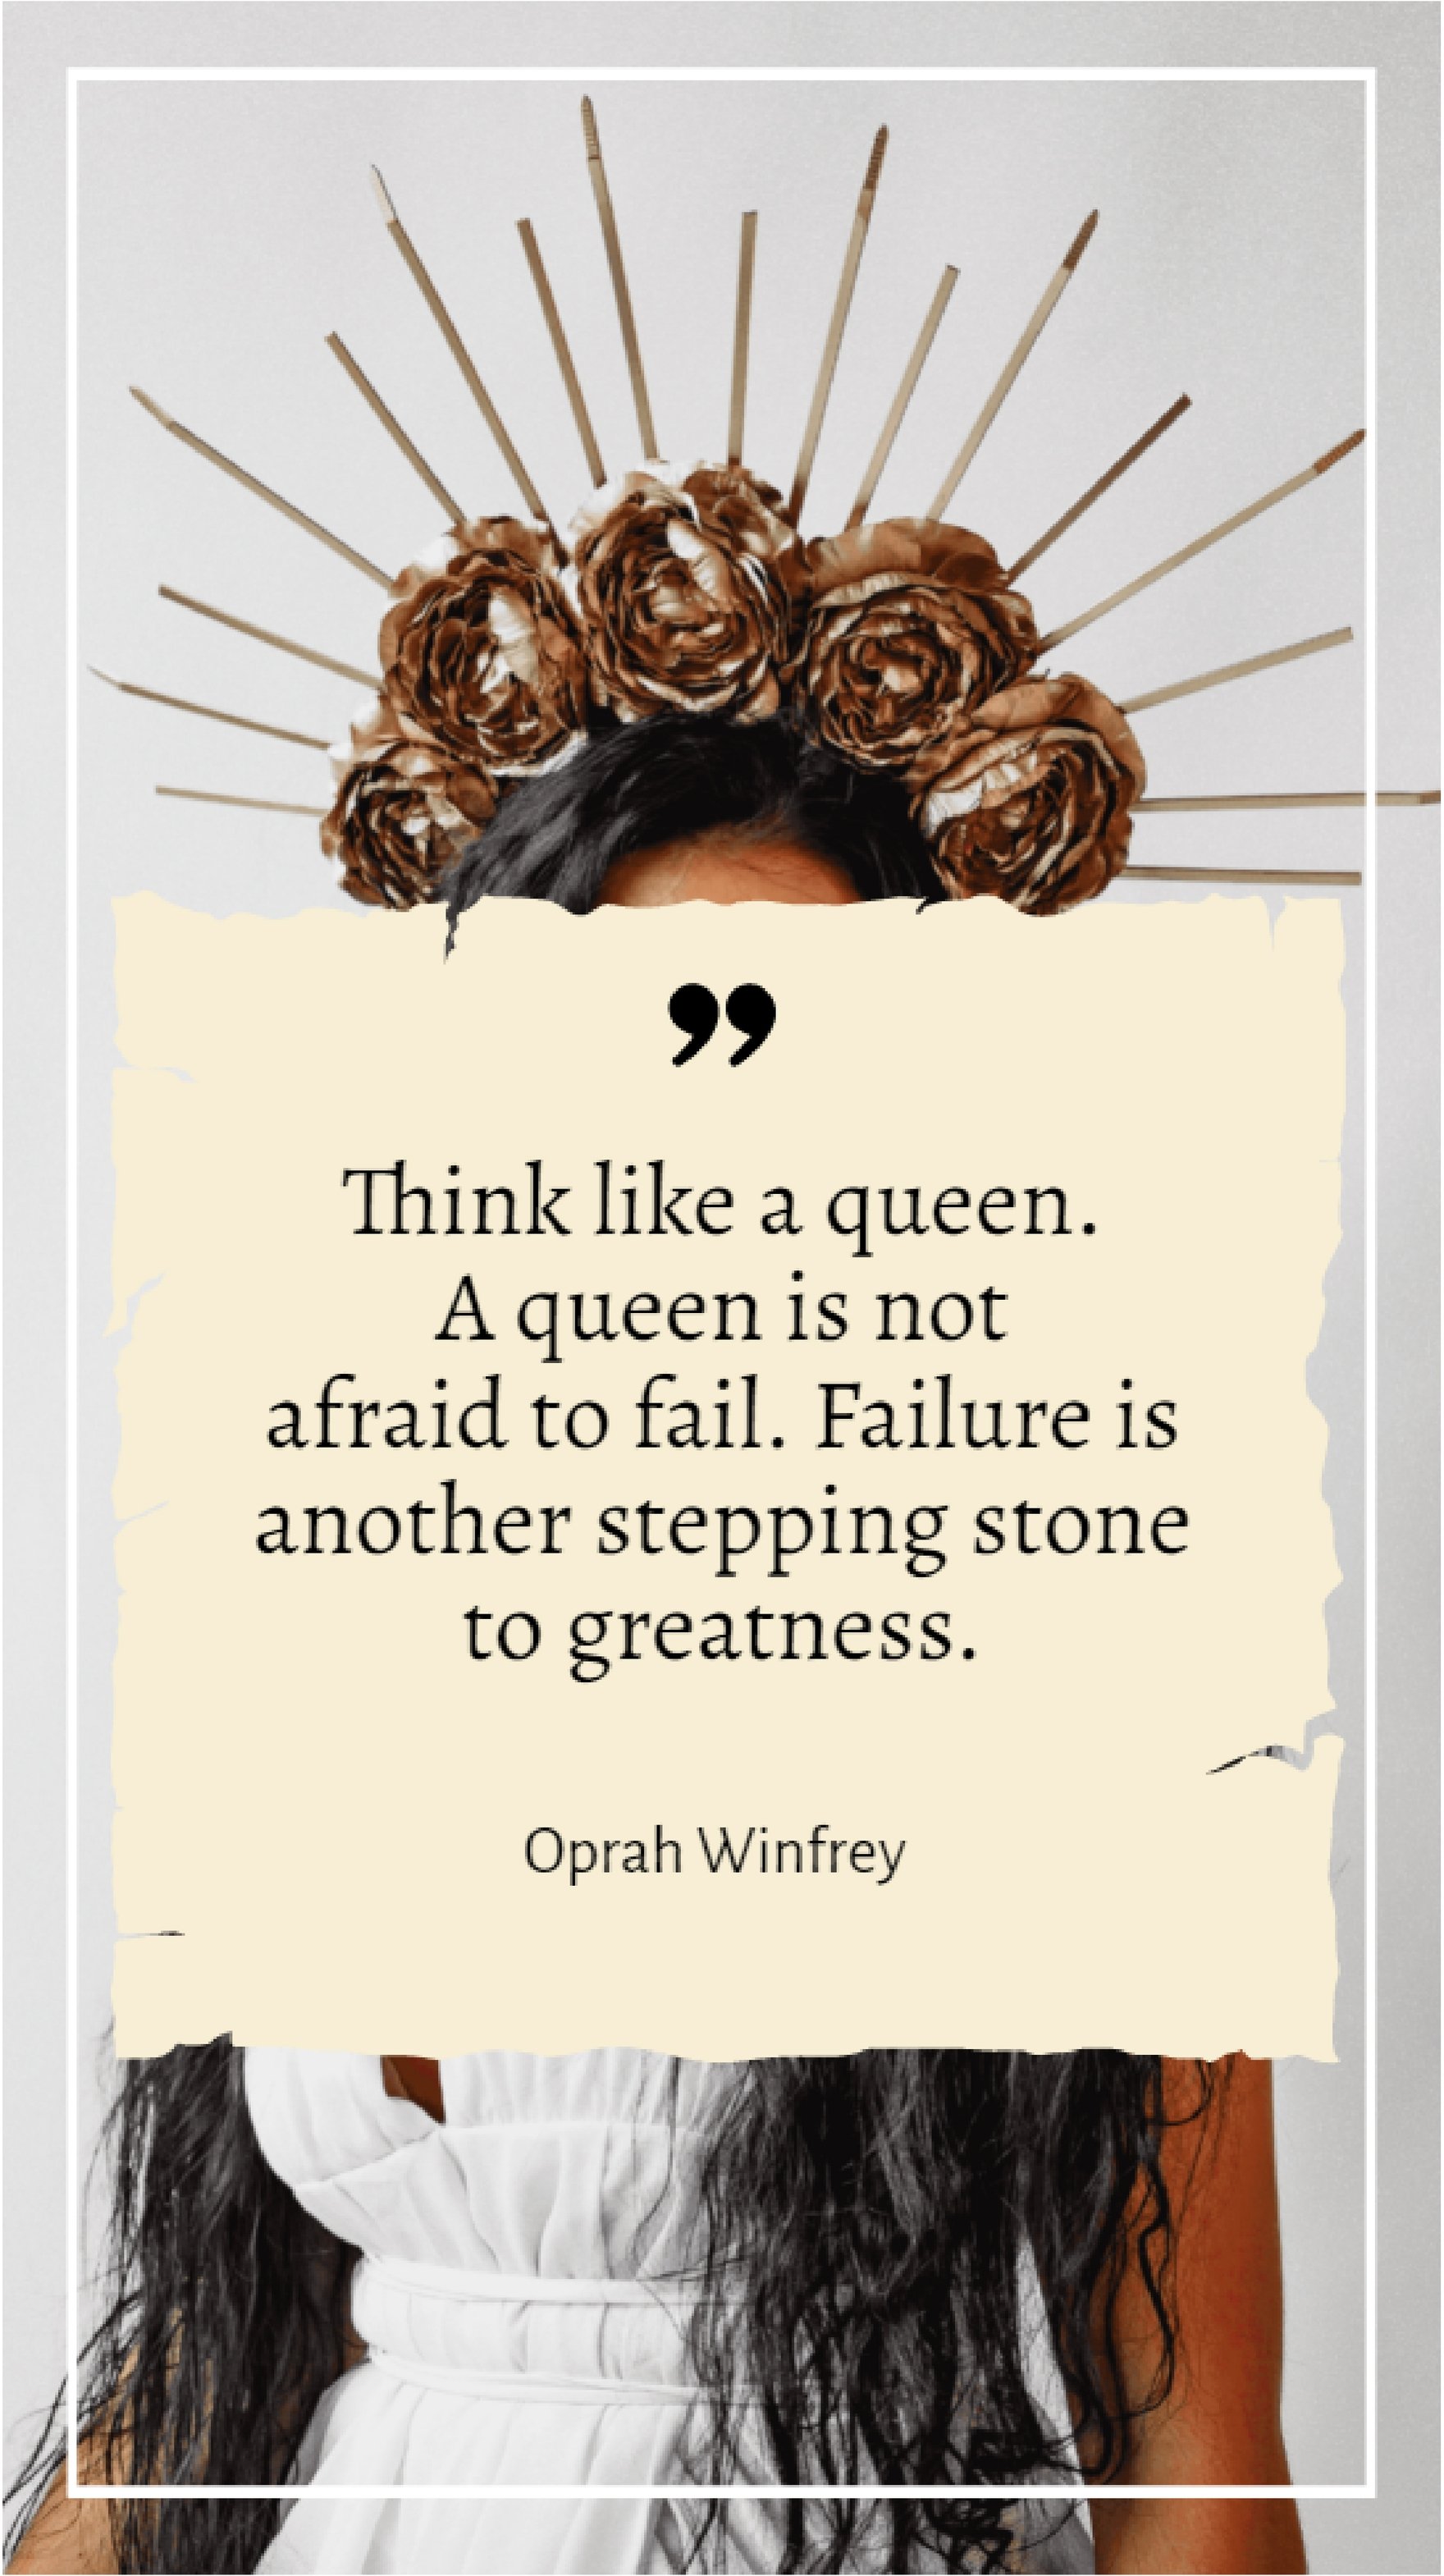 Oprah Winfrey - Think like a queen. A queen is not afraid to fail. Failure is another stepping stone to greatness.